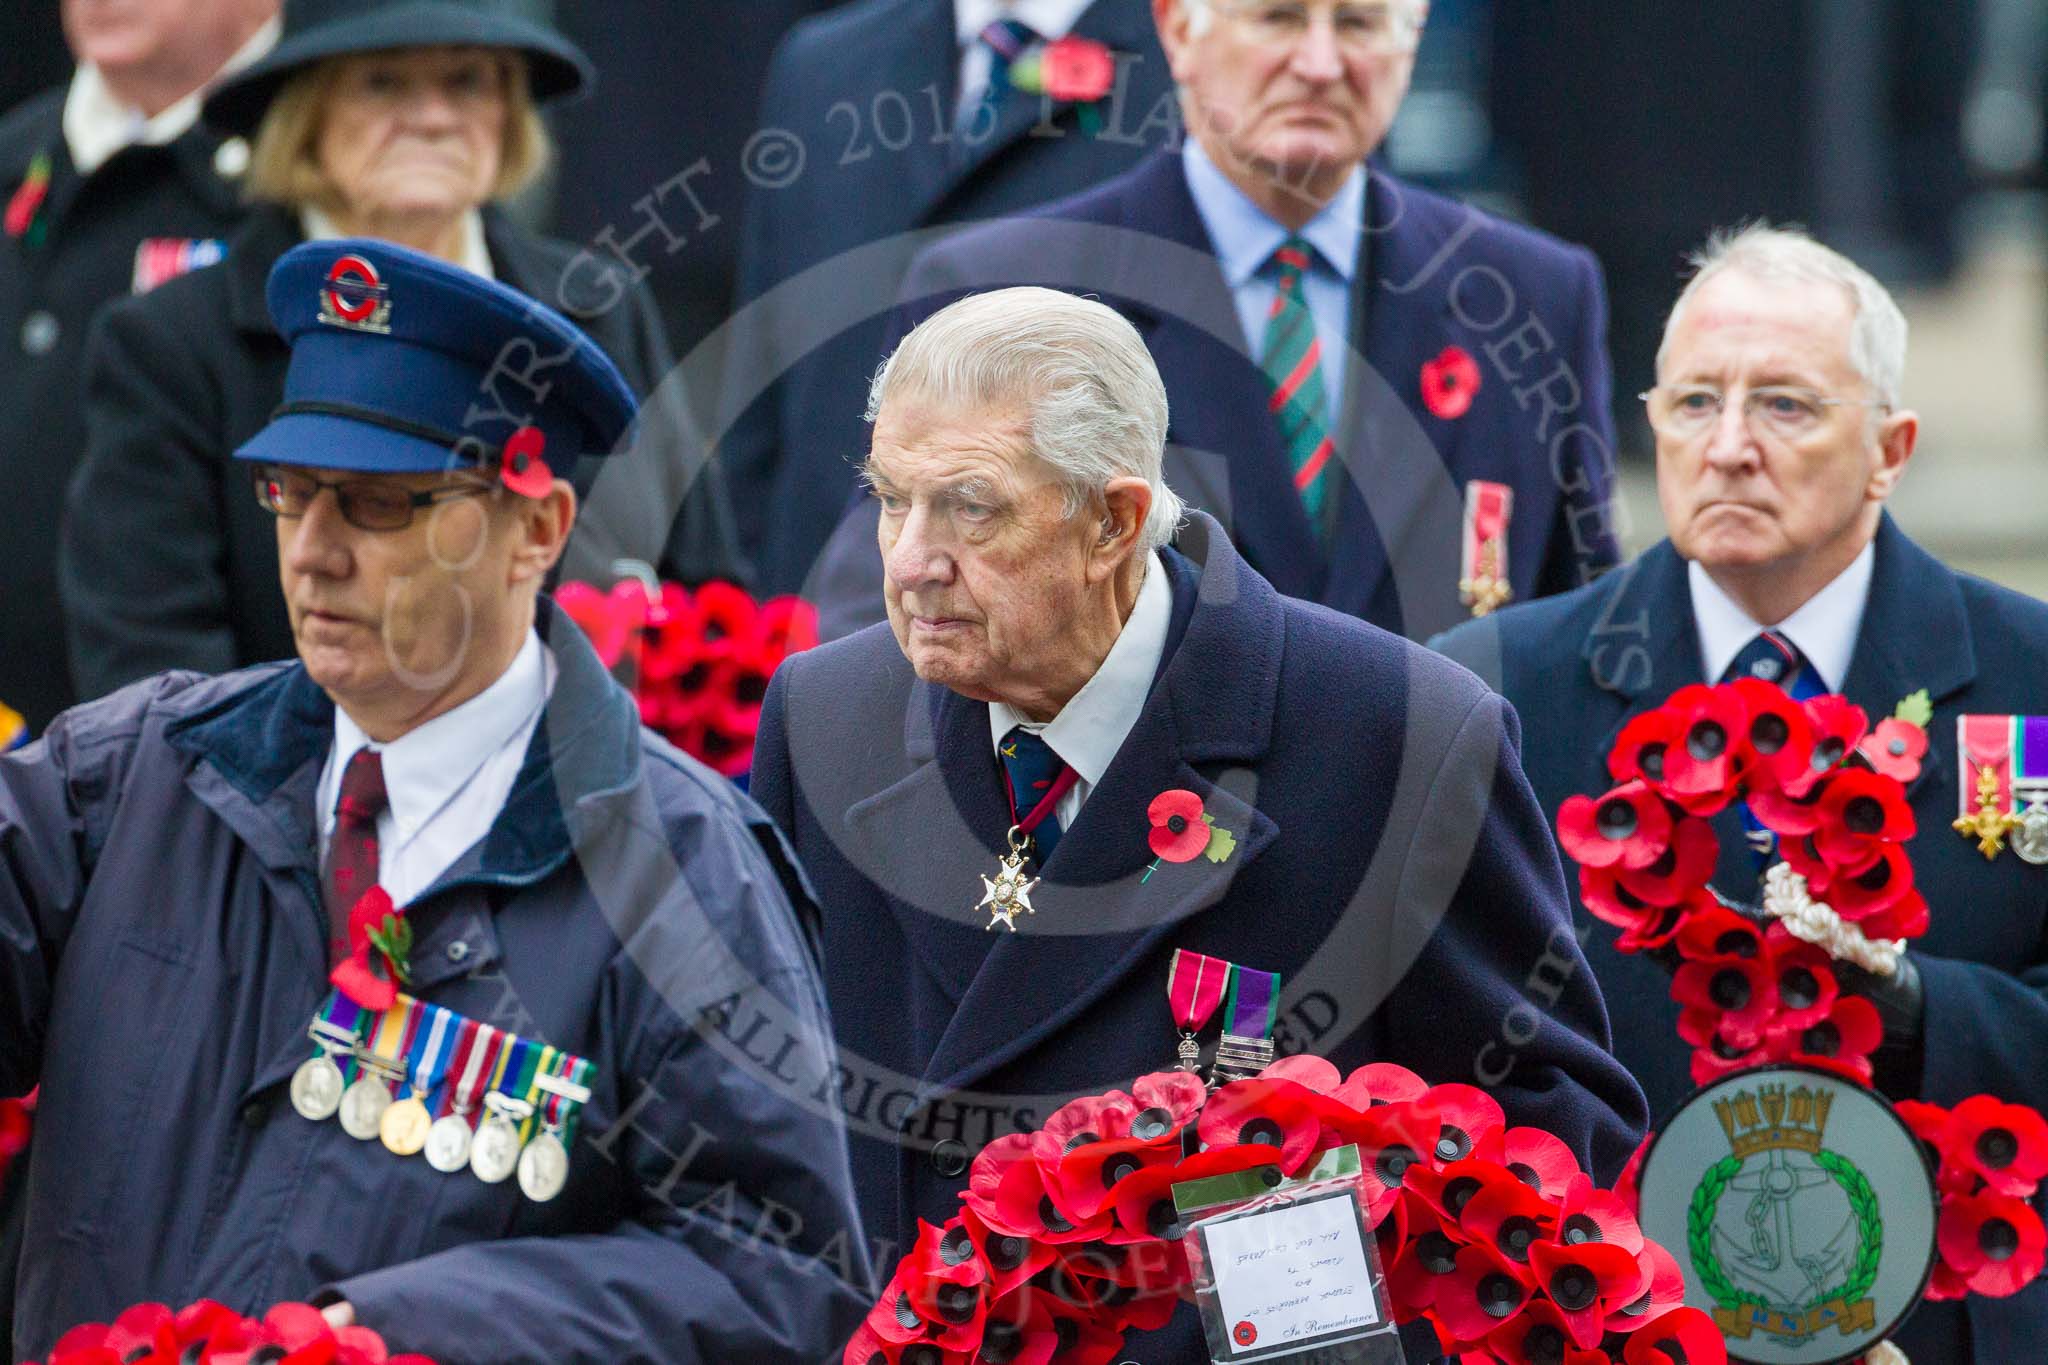 Remembrance Sunday at the Cenotaph 2015: On the way to the Cenotaph to lay their wreaths: Eric Reeve for Transport for London, Air Vice-Marshal David Whitaker for the Royal Air Force Association, Christopher Dovey for the Royal Navy Association, and Jan Harvey for Royal British Legion Scotland. Image #339, 08 November 2015 11:25 Whitehall, London, UK